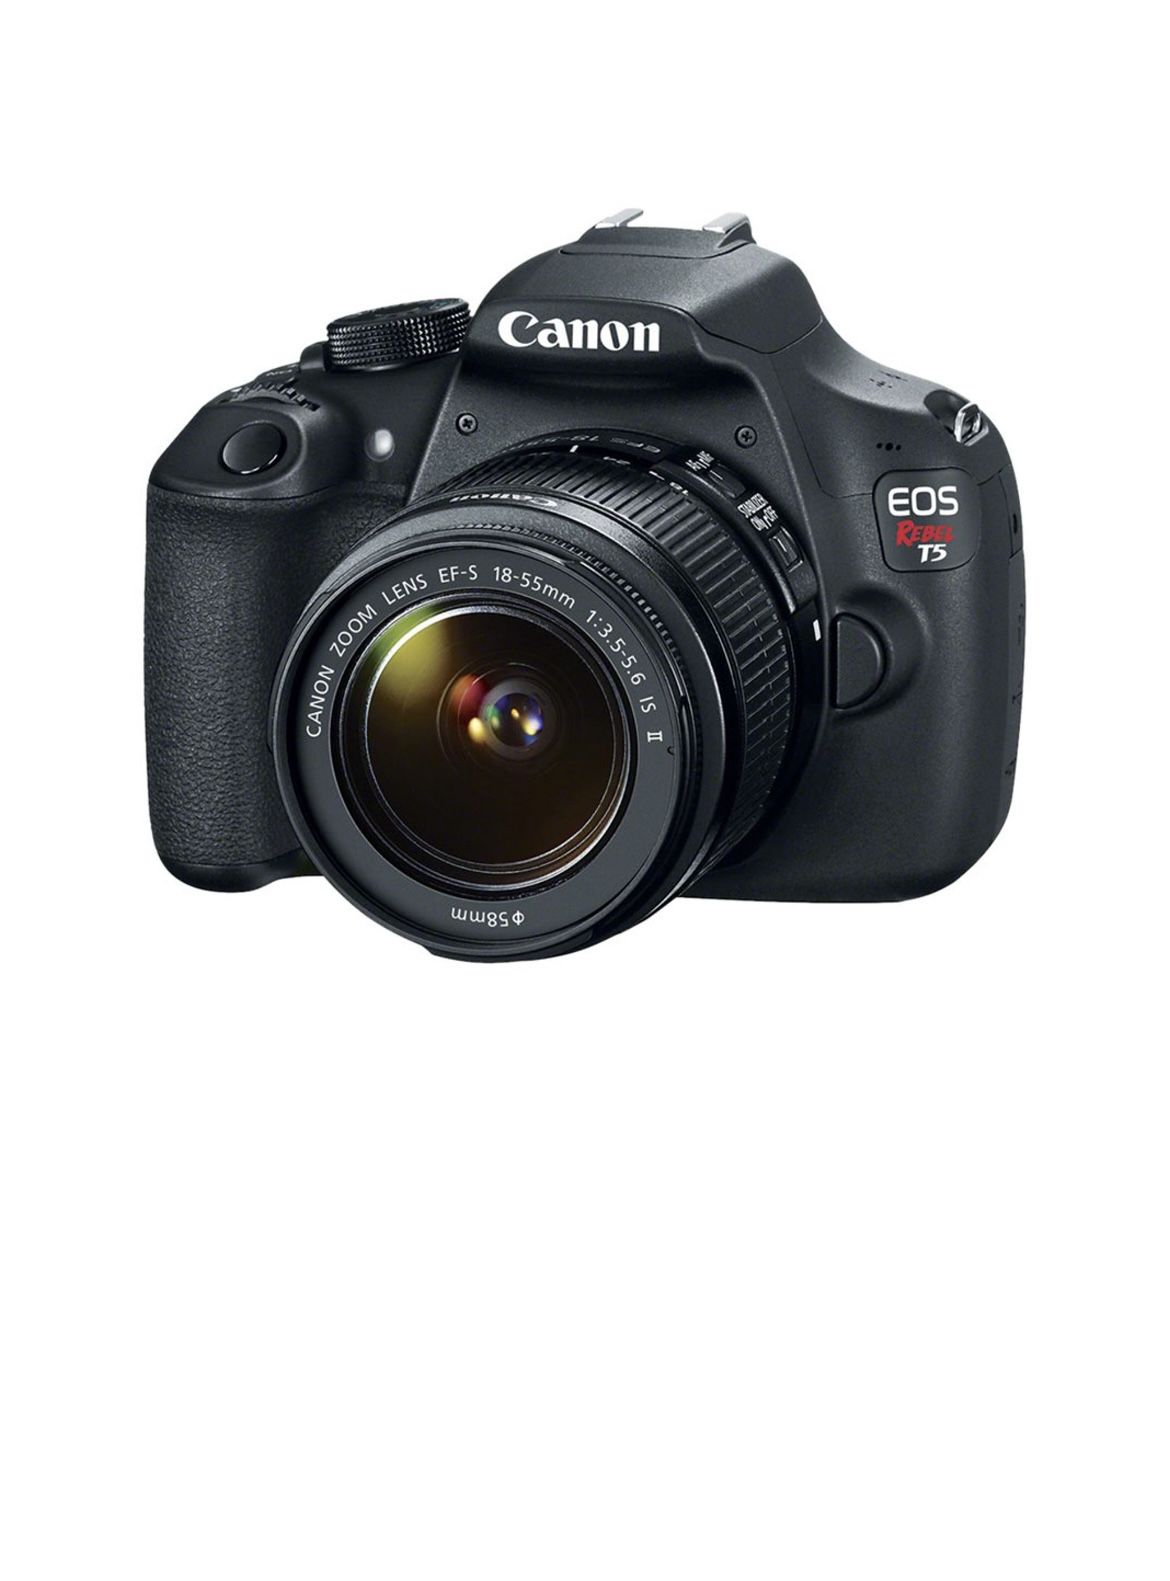 Camera Canon with 18MP & 18-55mm Zoom Lens - Capture Life's Best Moments